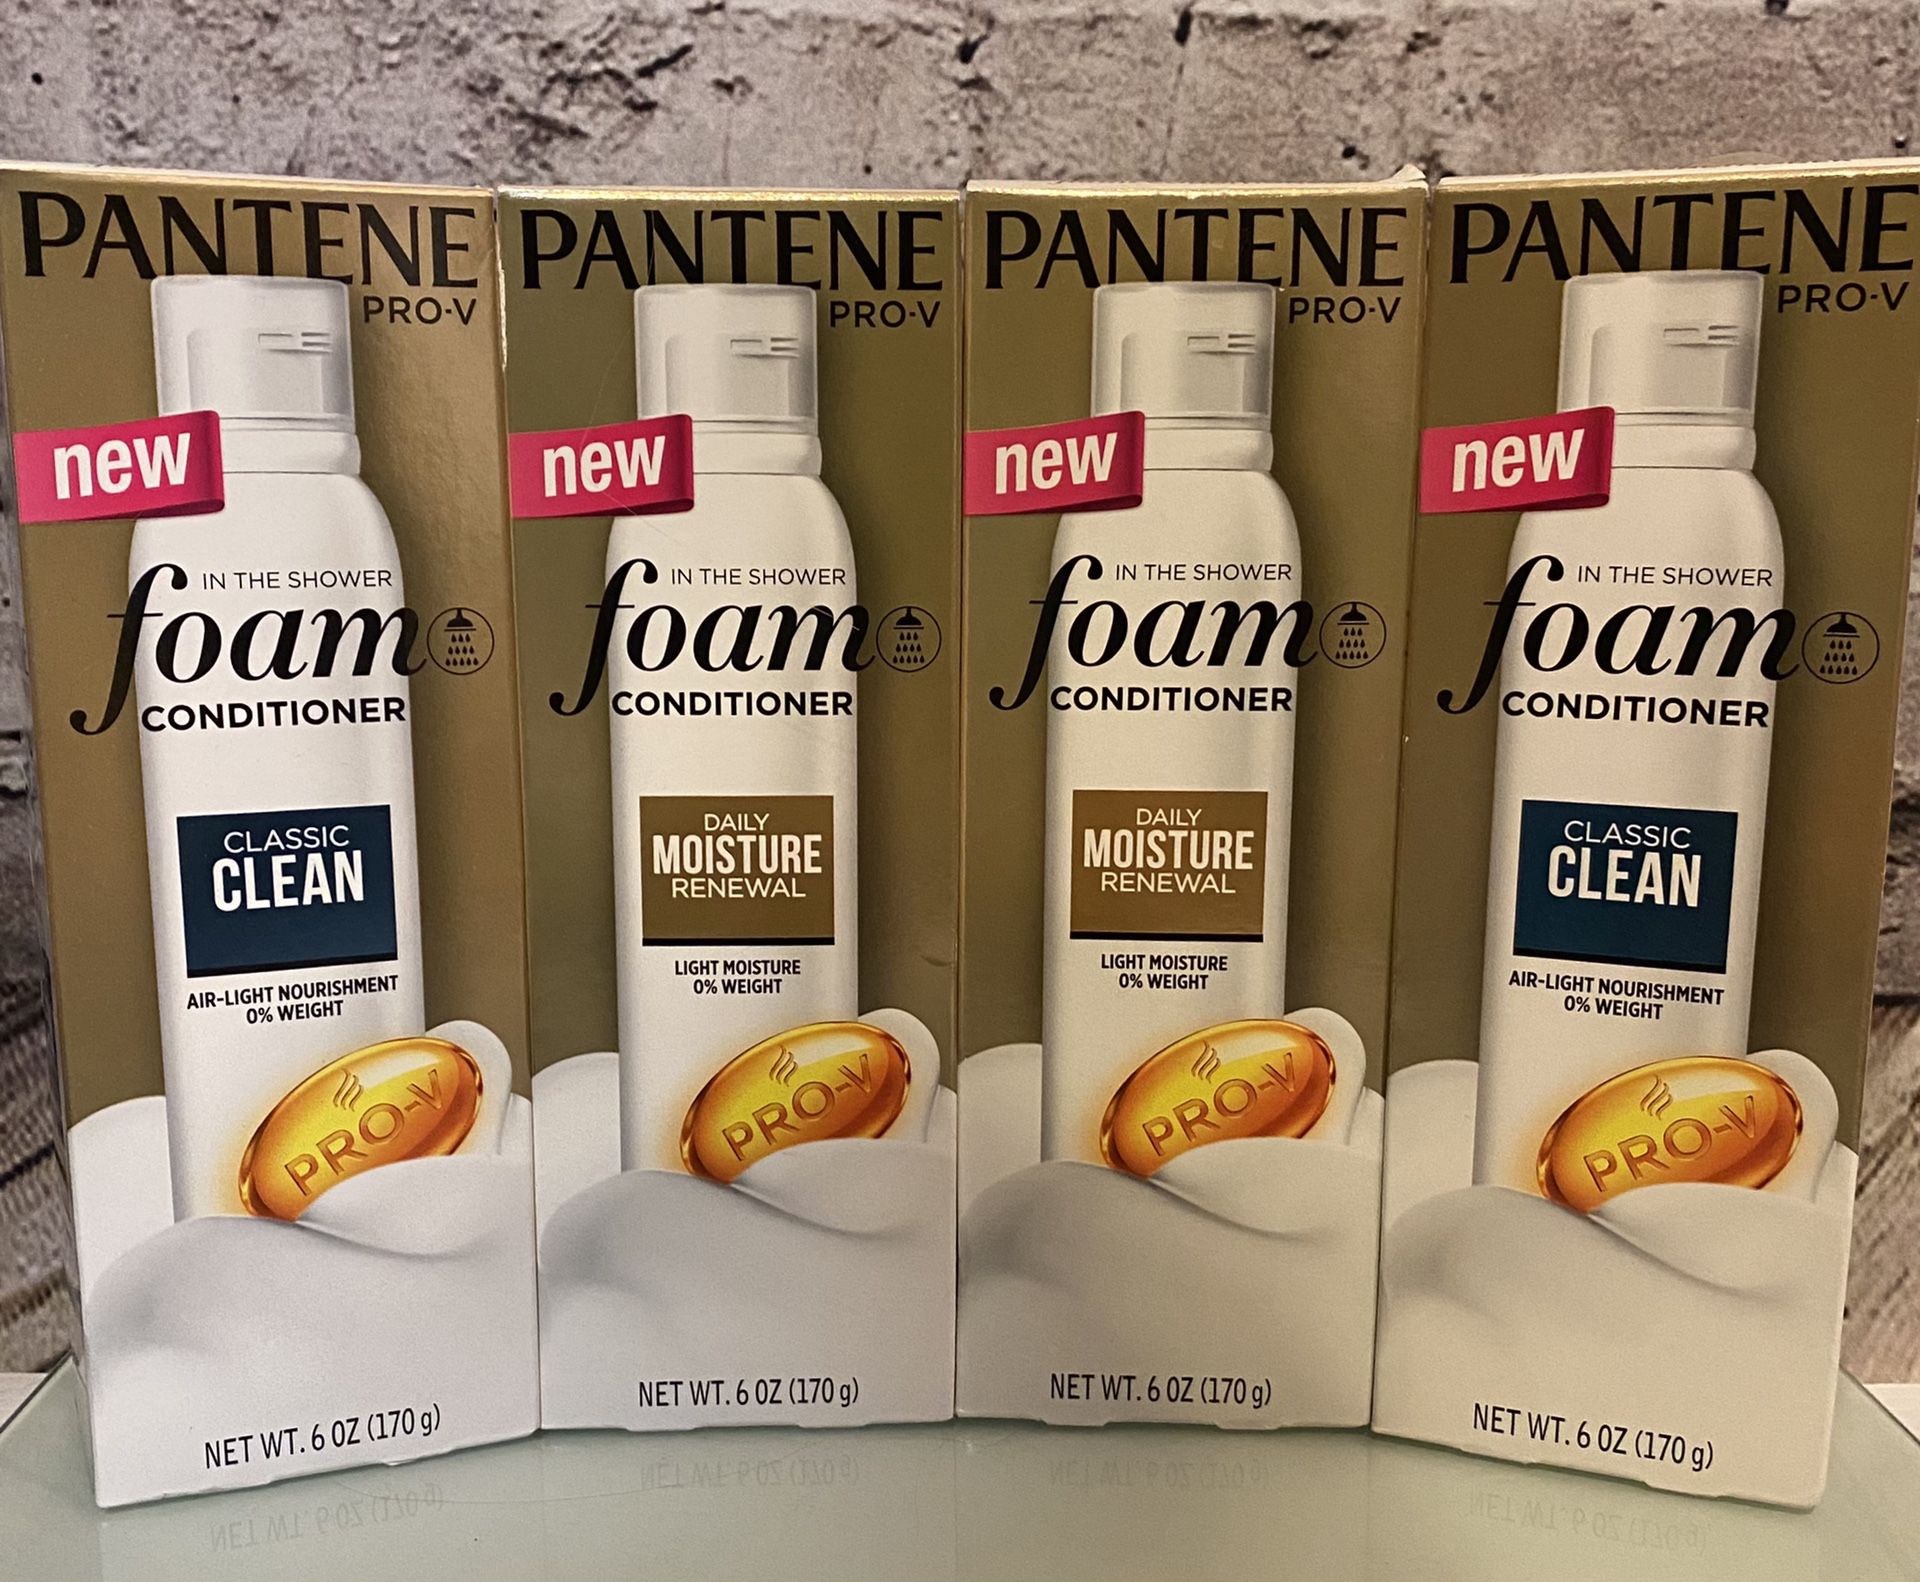 4 NEW Pantene in the shower foam CONDITIONERS! Excellent price!